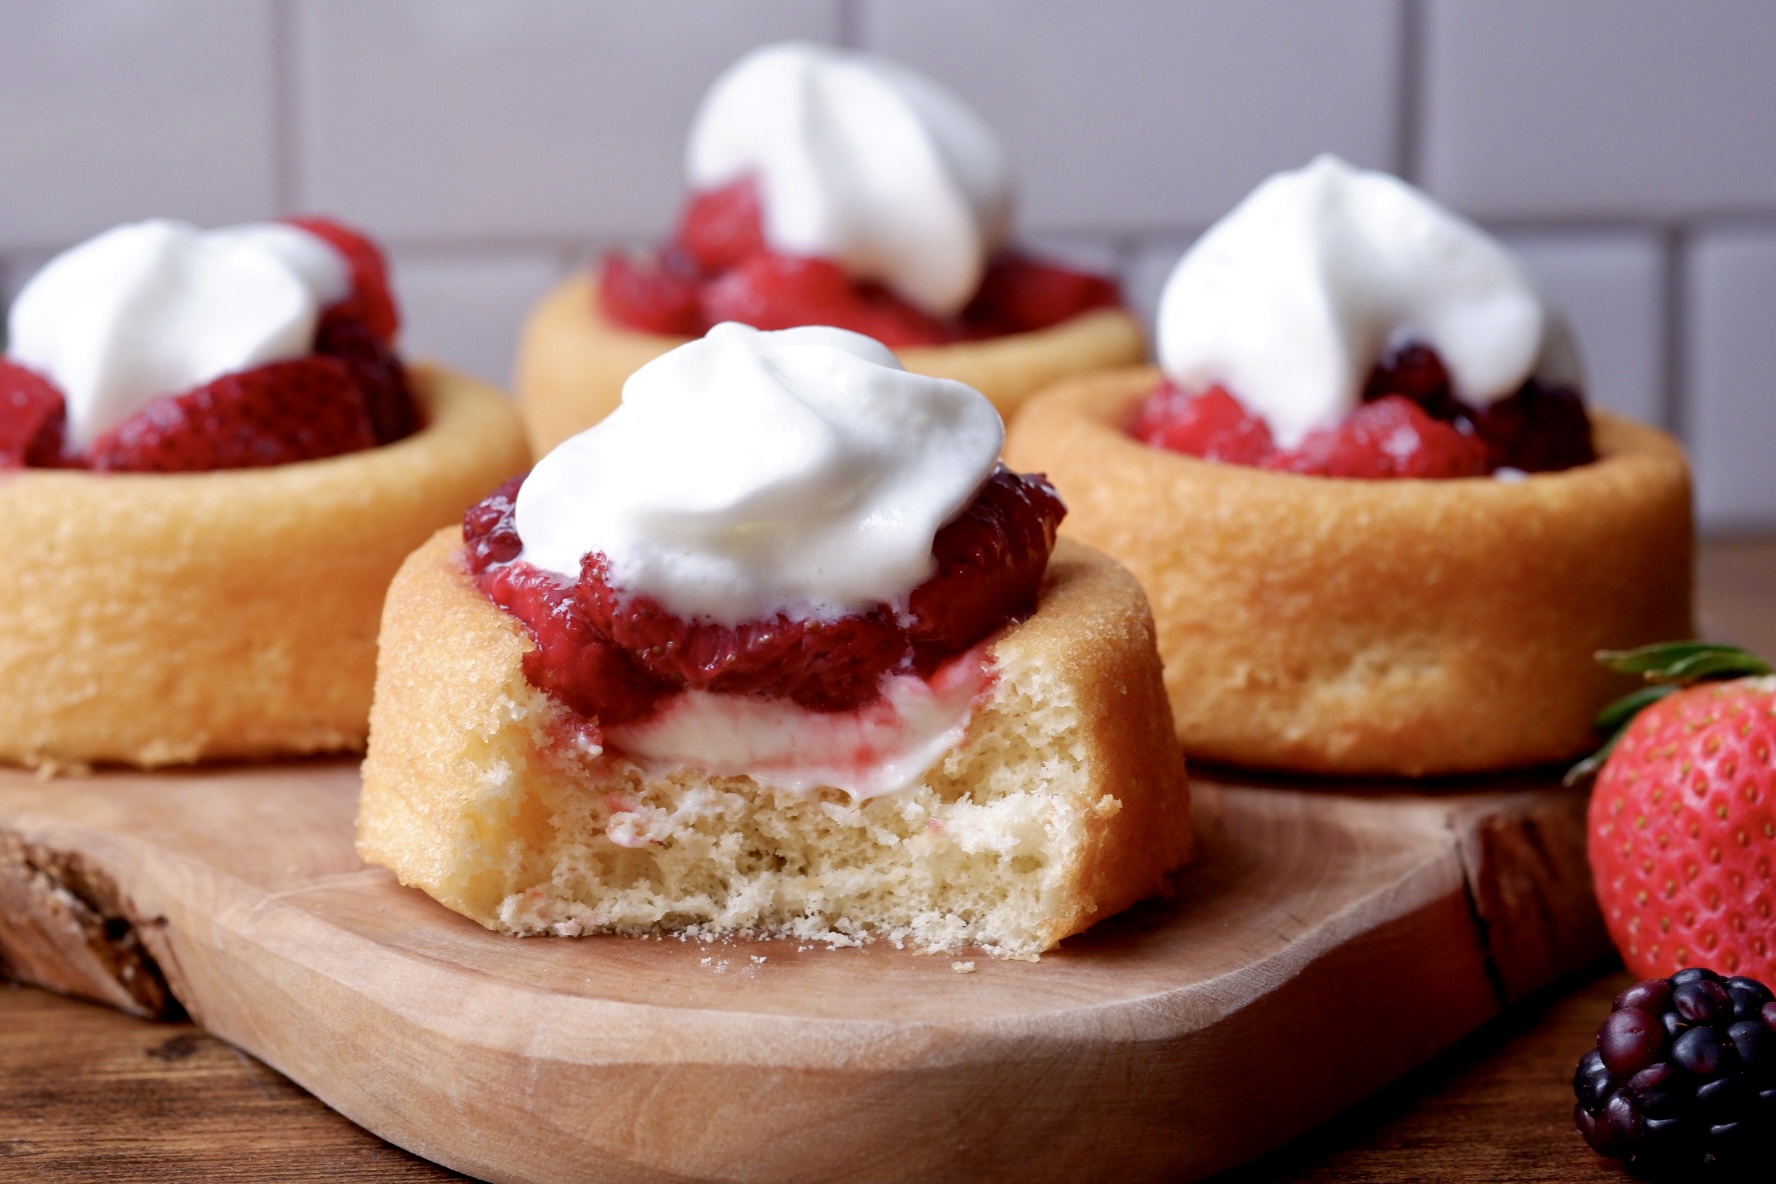 Creamy and Berry-Filled Indulgences